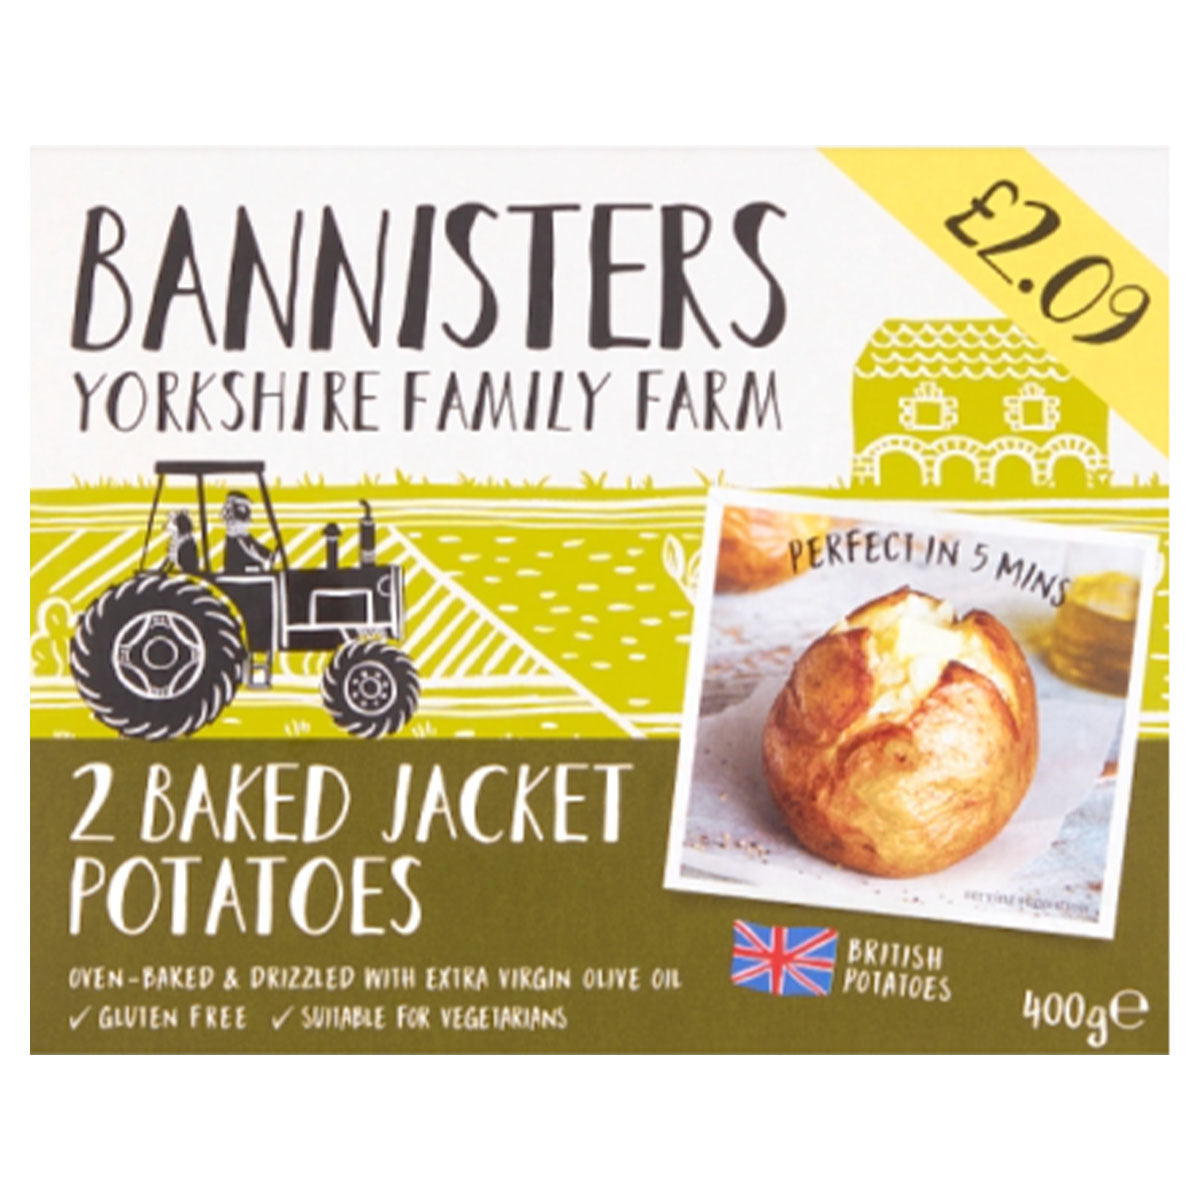 Bannisters - 2 Baked Jacket Potatoes - 400g - Continental Food Store